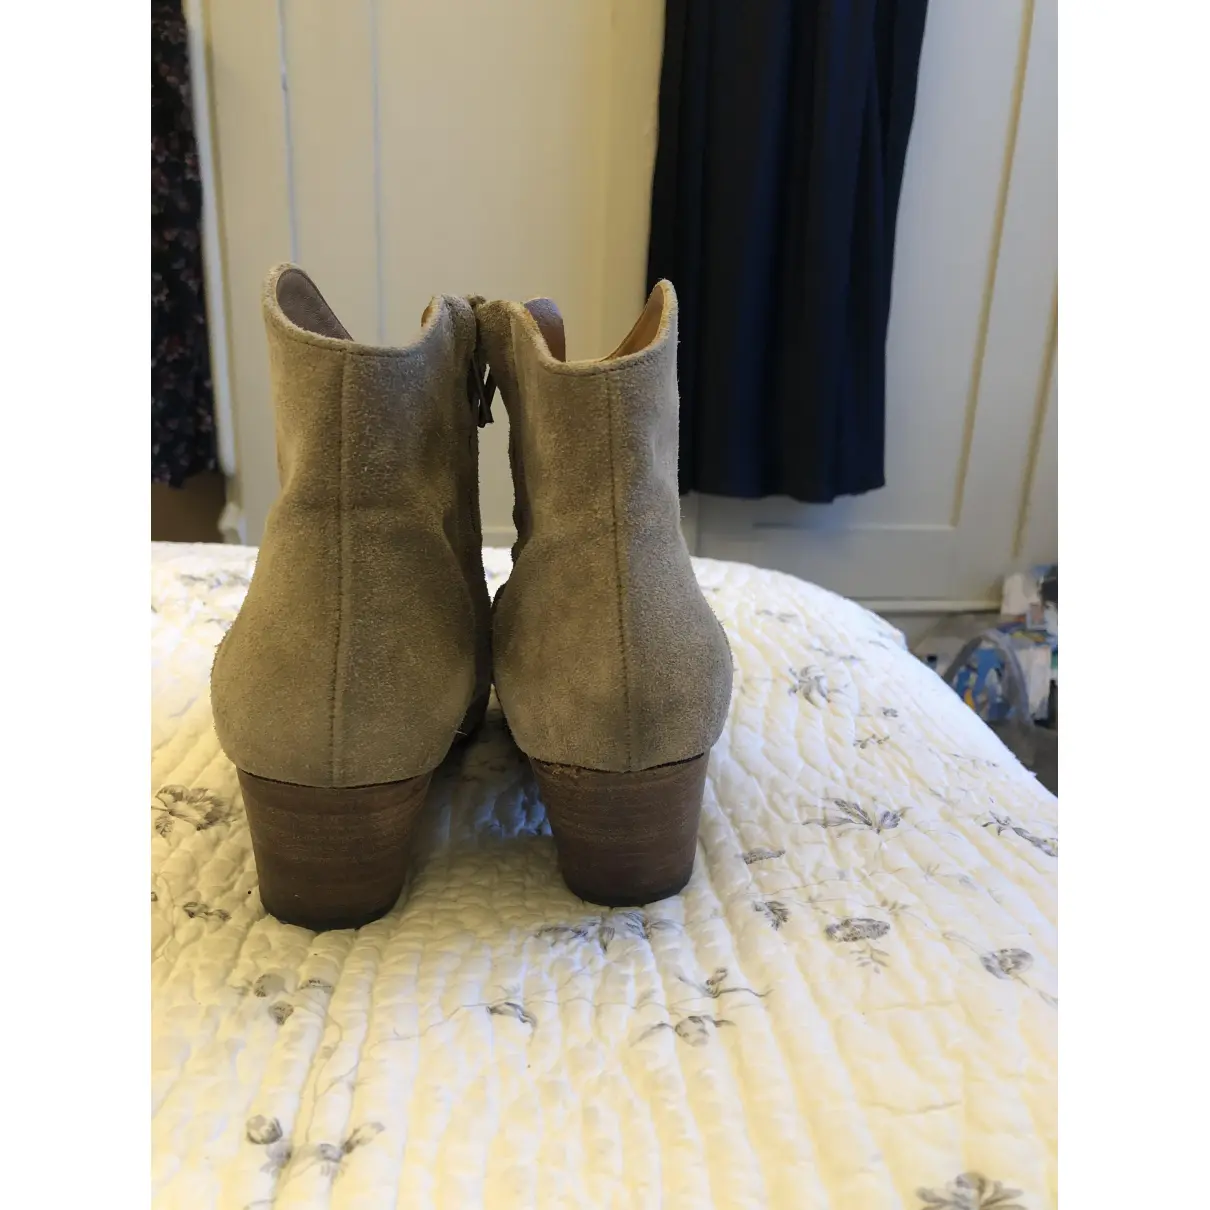 Ankle boots Isabel Marant